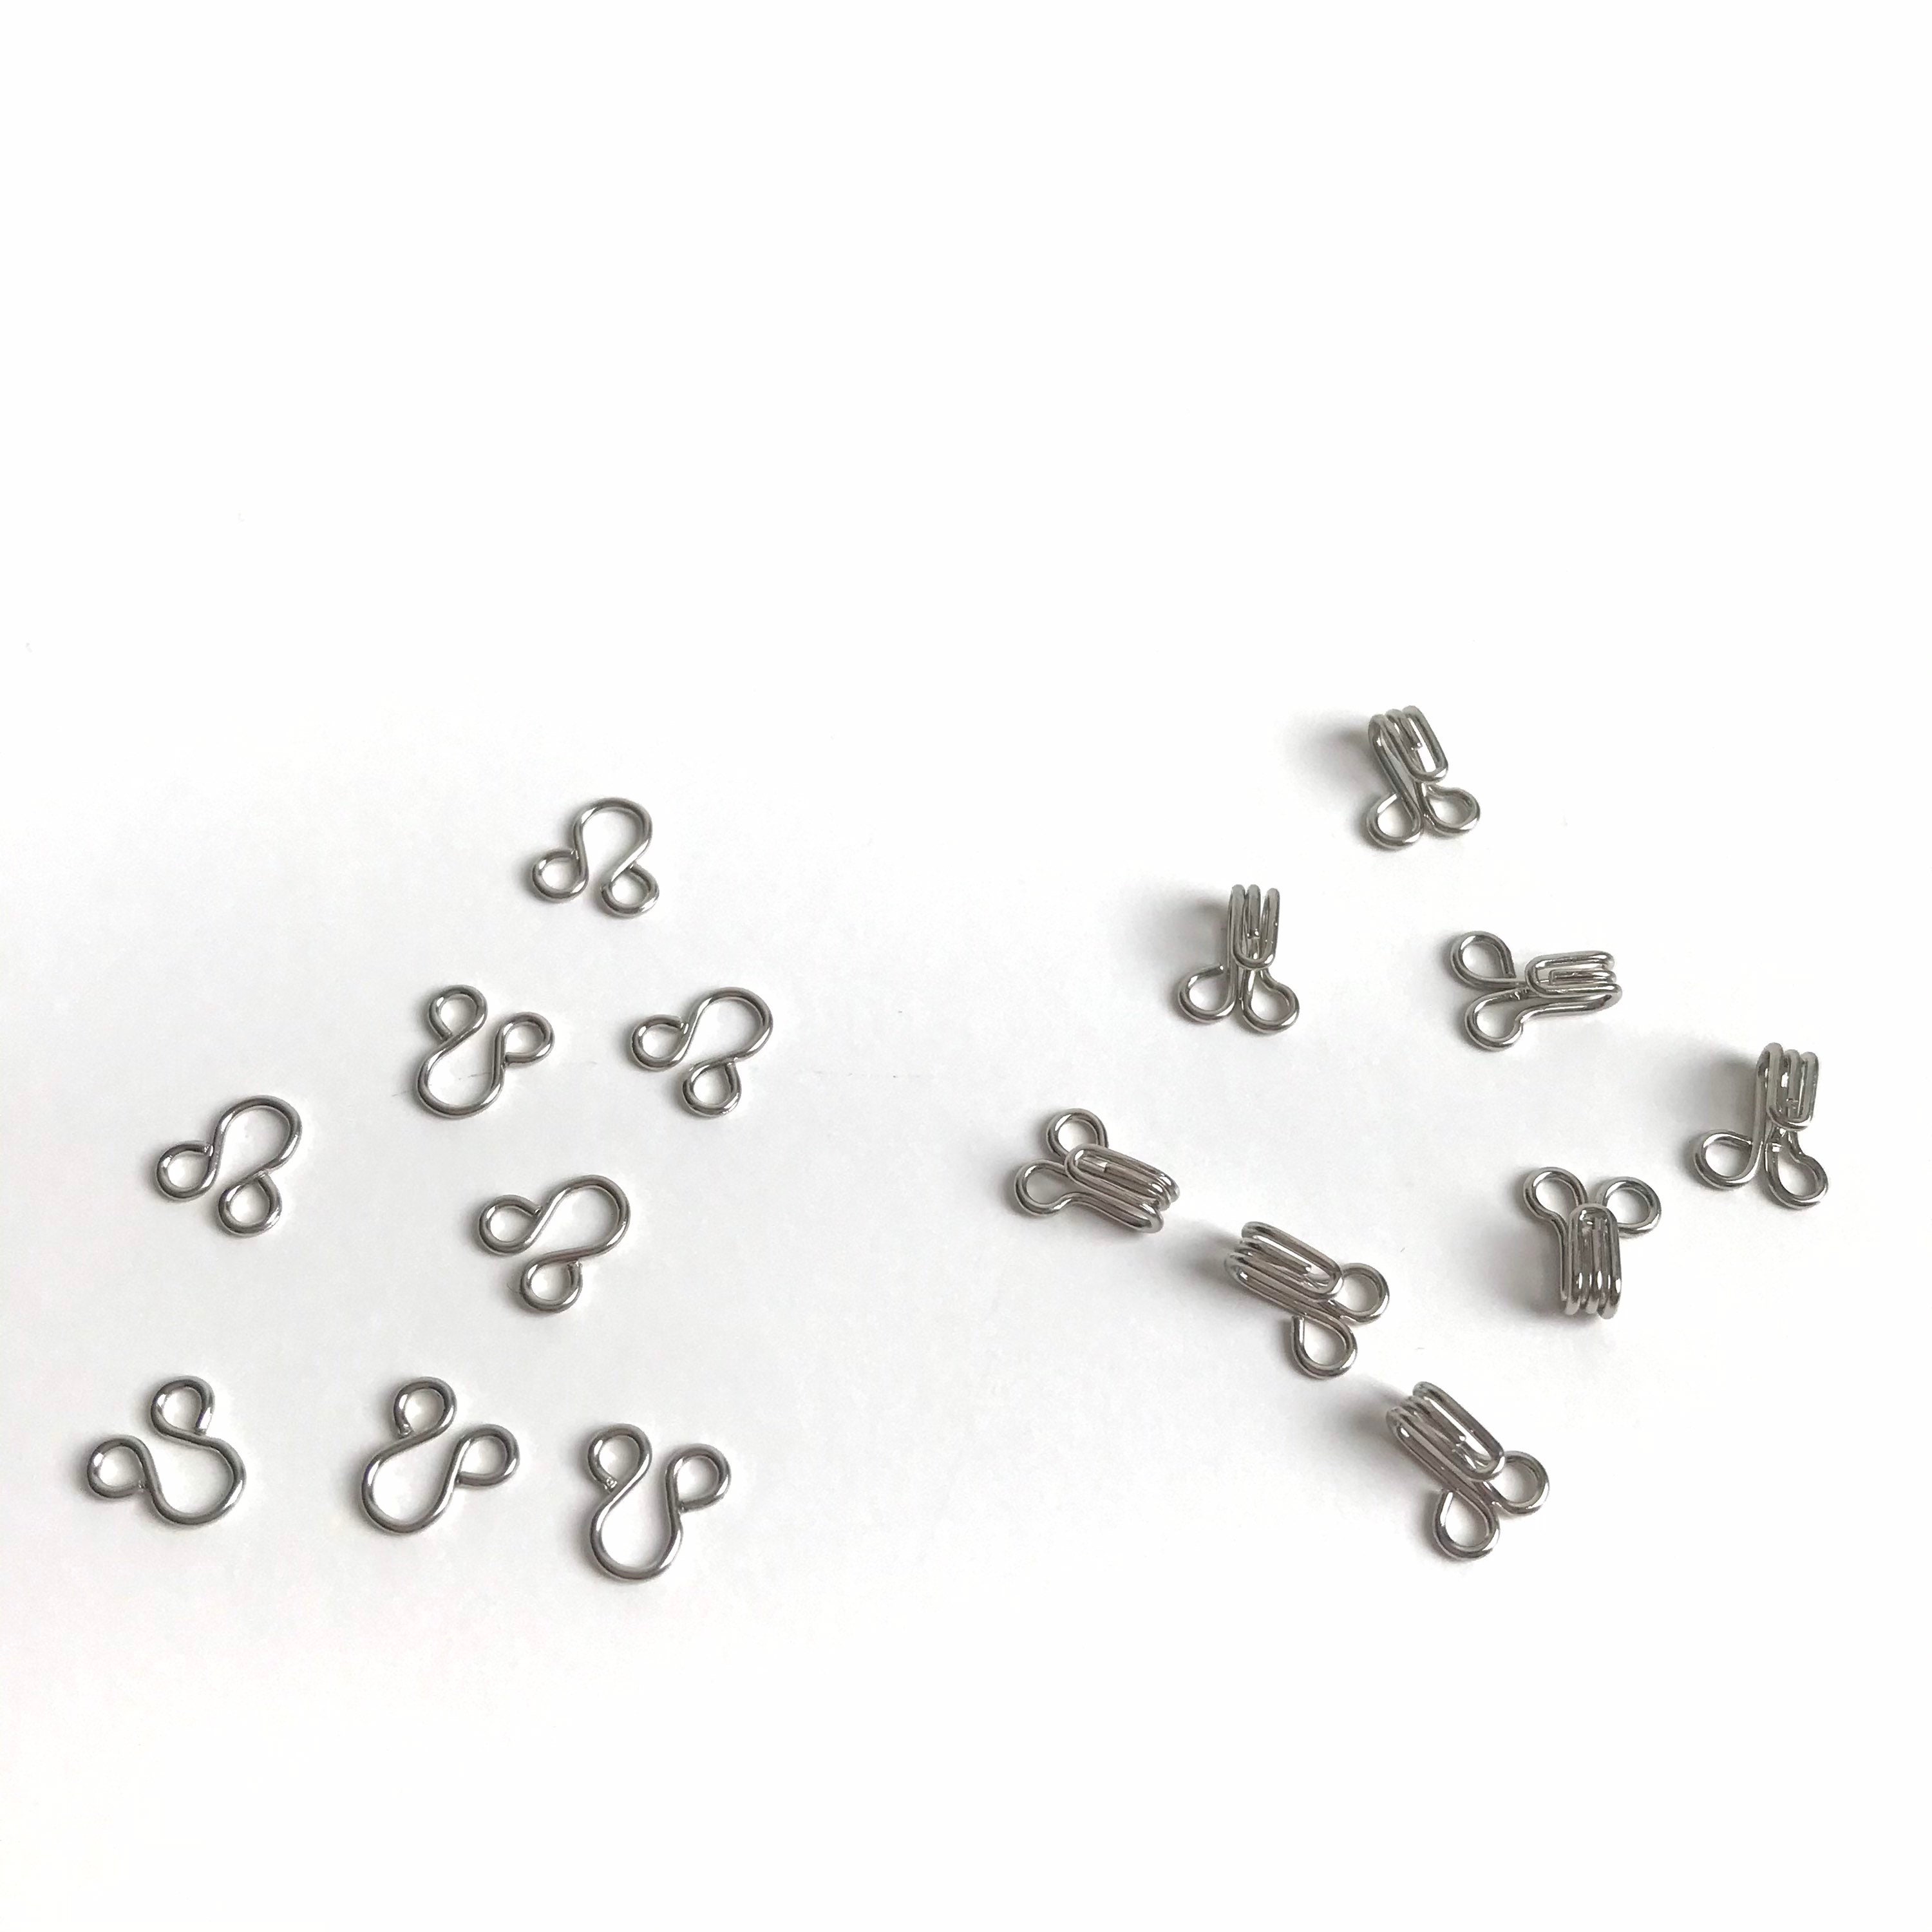 VEVESI 10 Sets 12mm Metal Bra Clasp Sewing Lingerie Front Closure